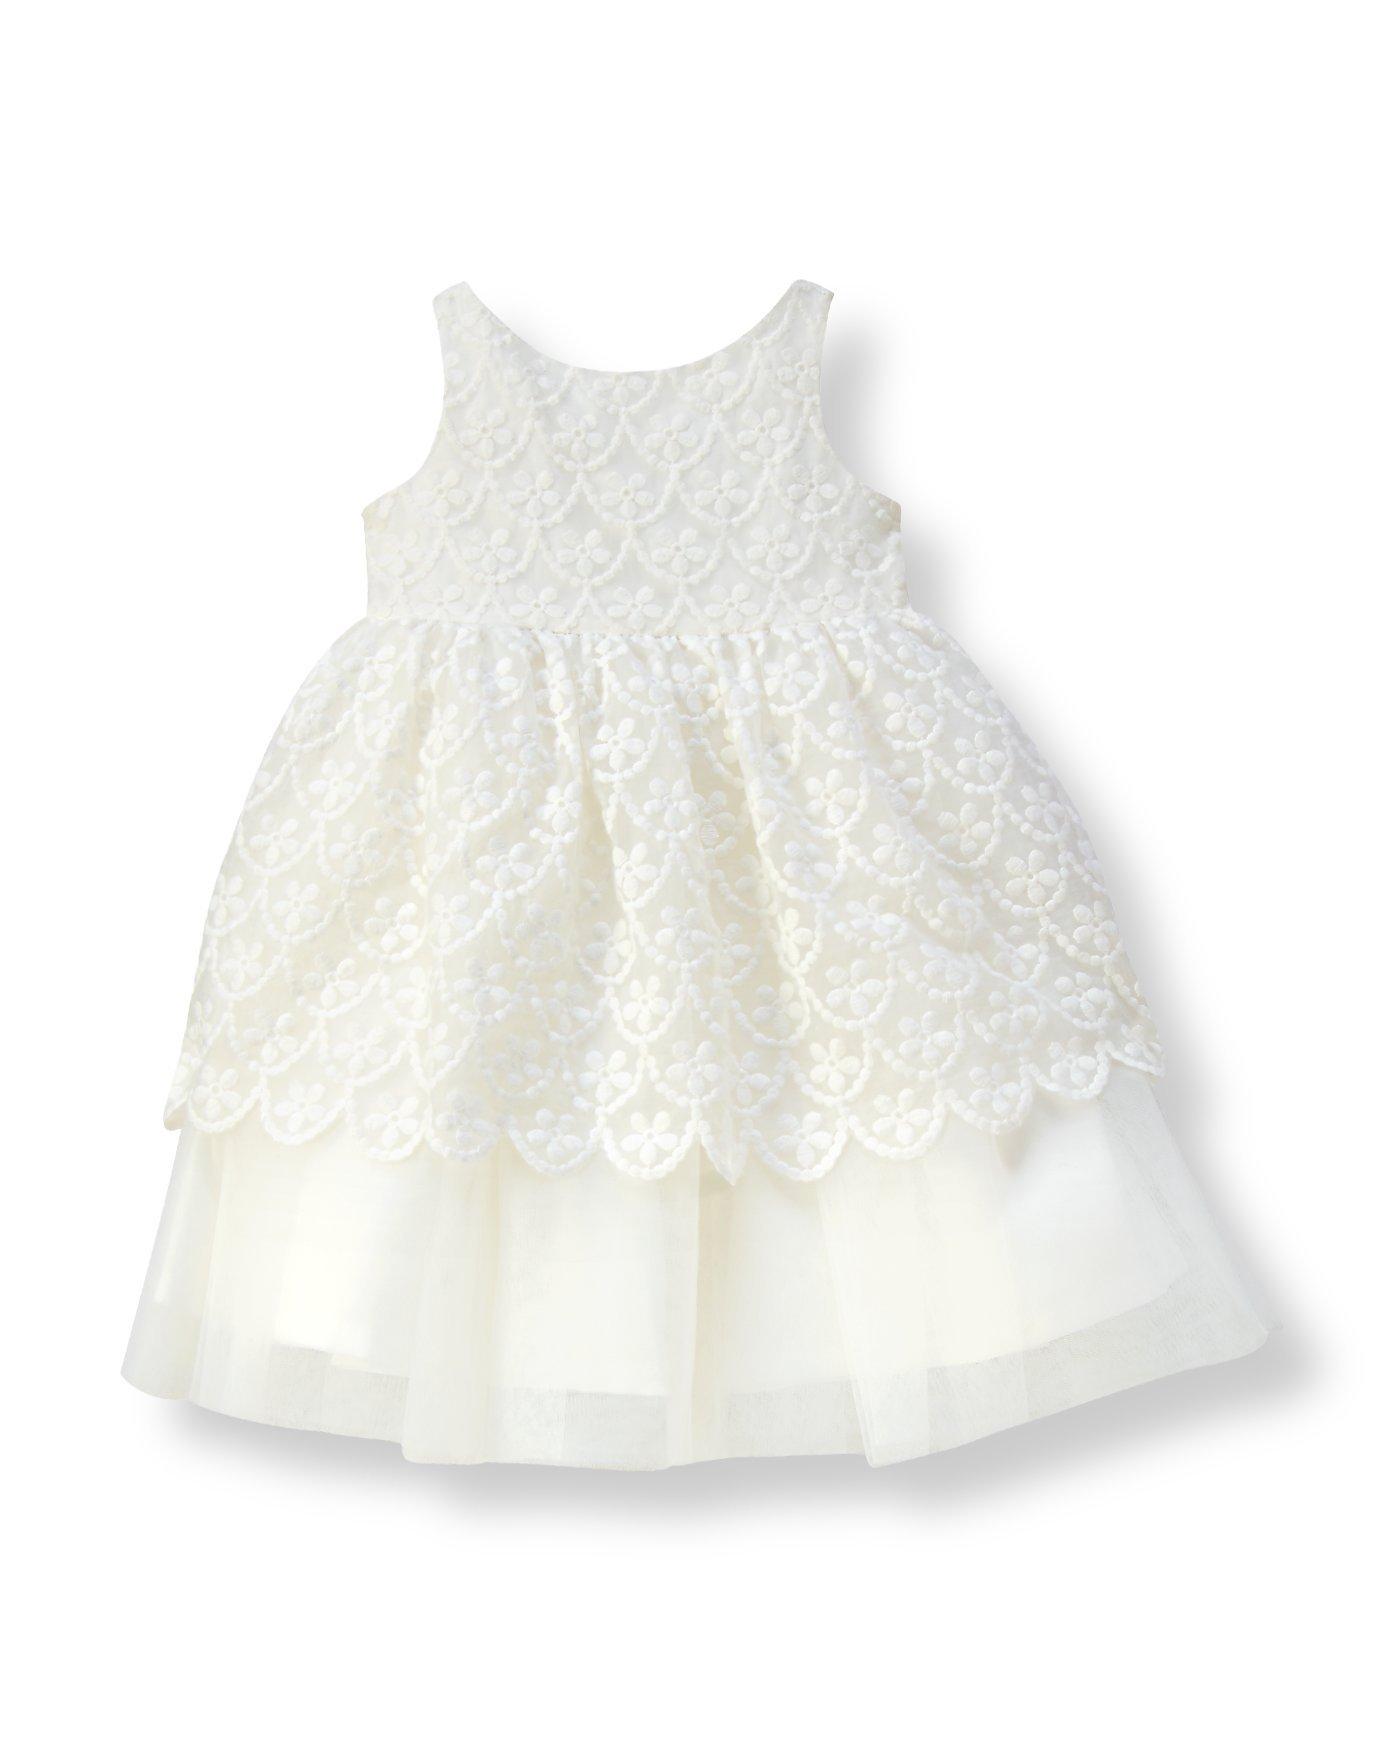 janie and jack special occasion dress